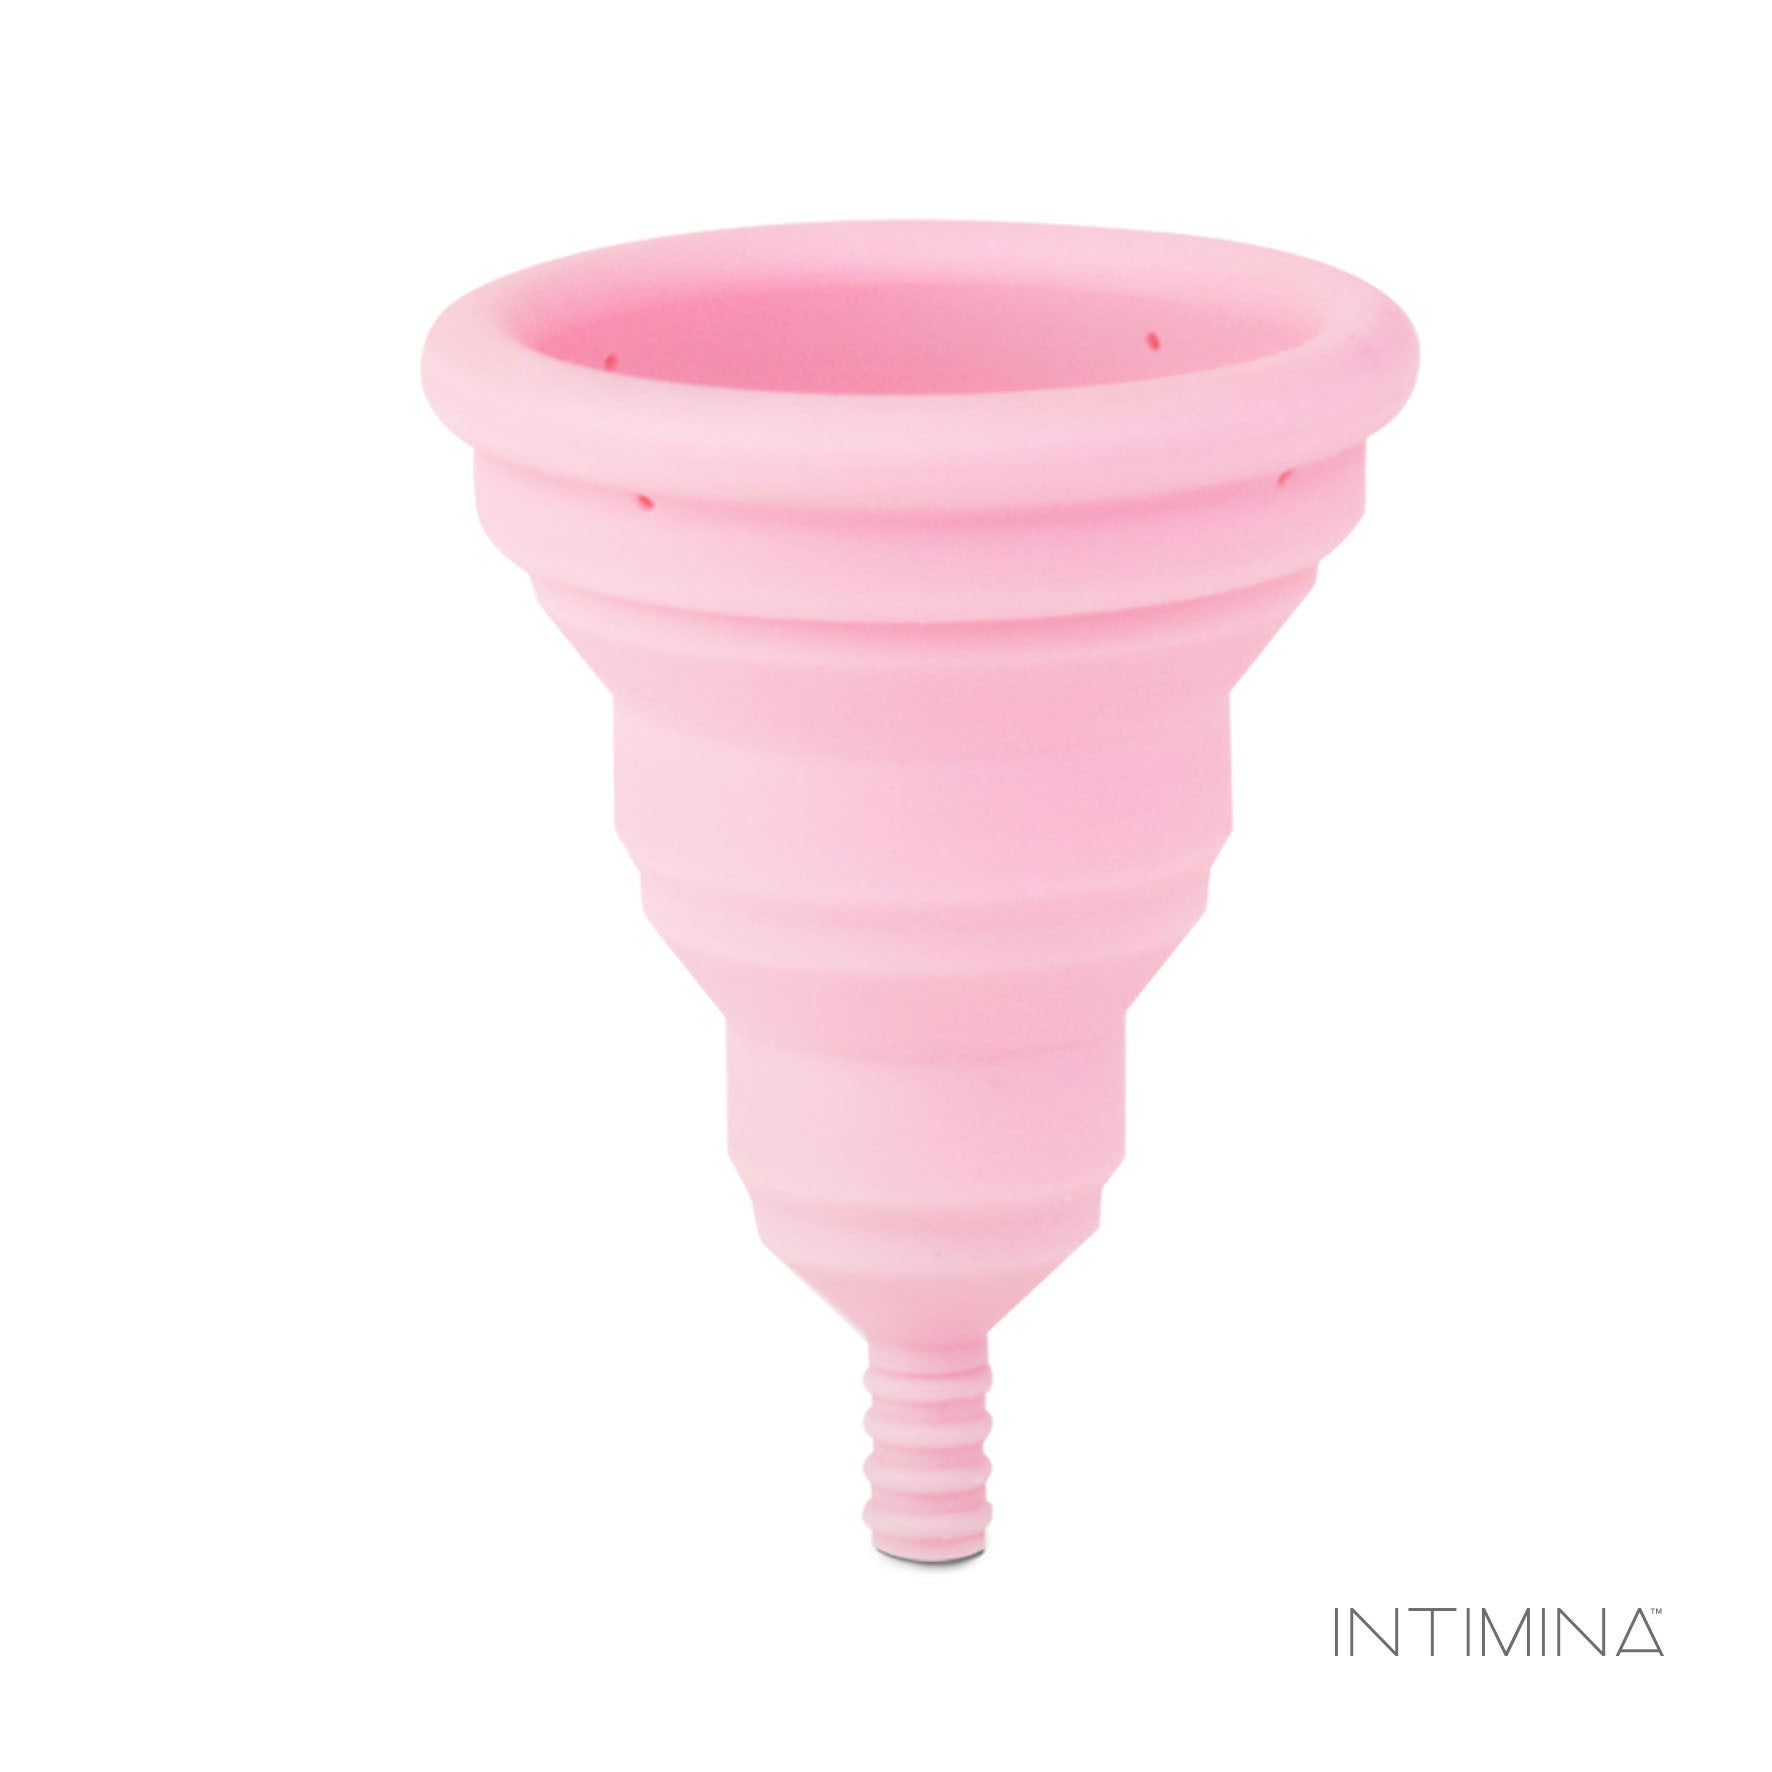 Intimina Lily Cup - Compact Size A - Happeriod